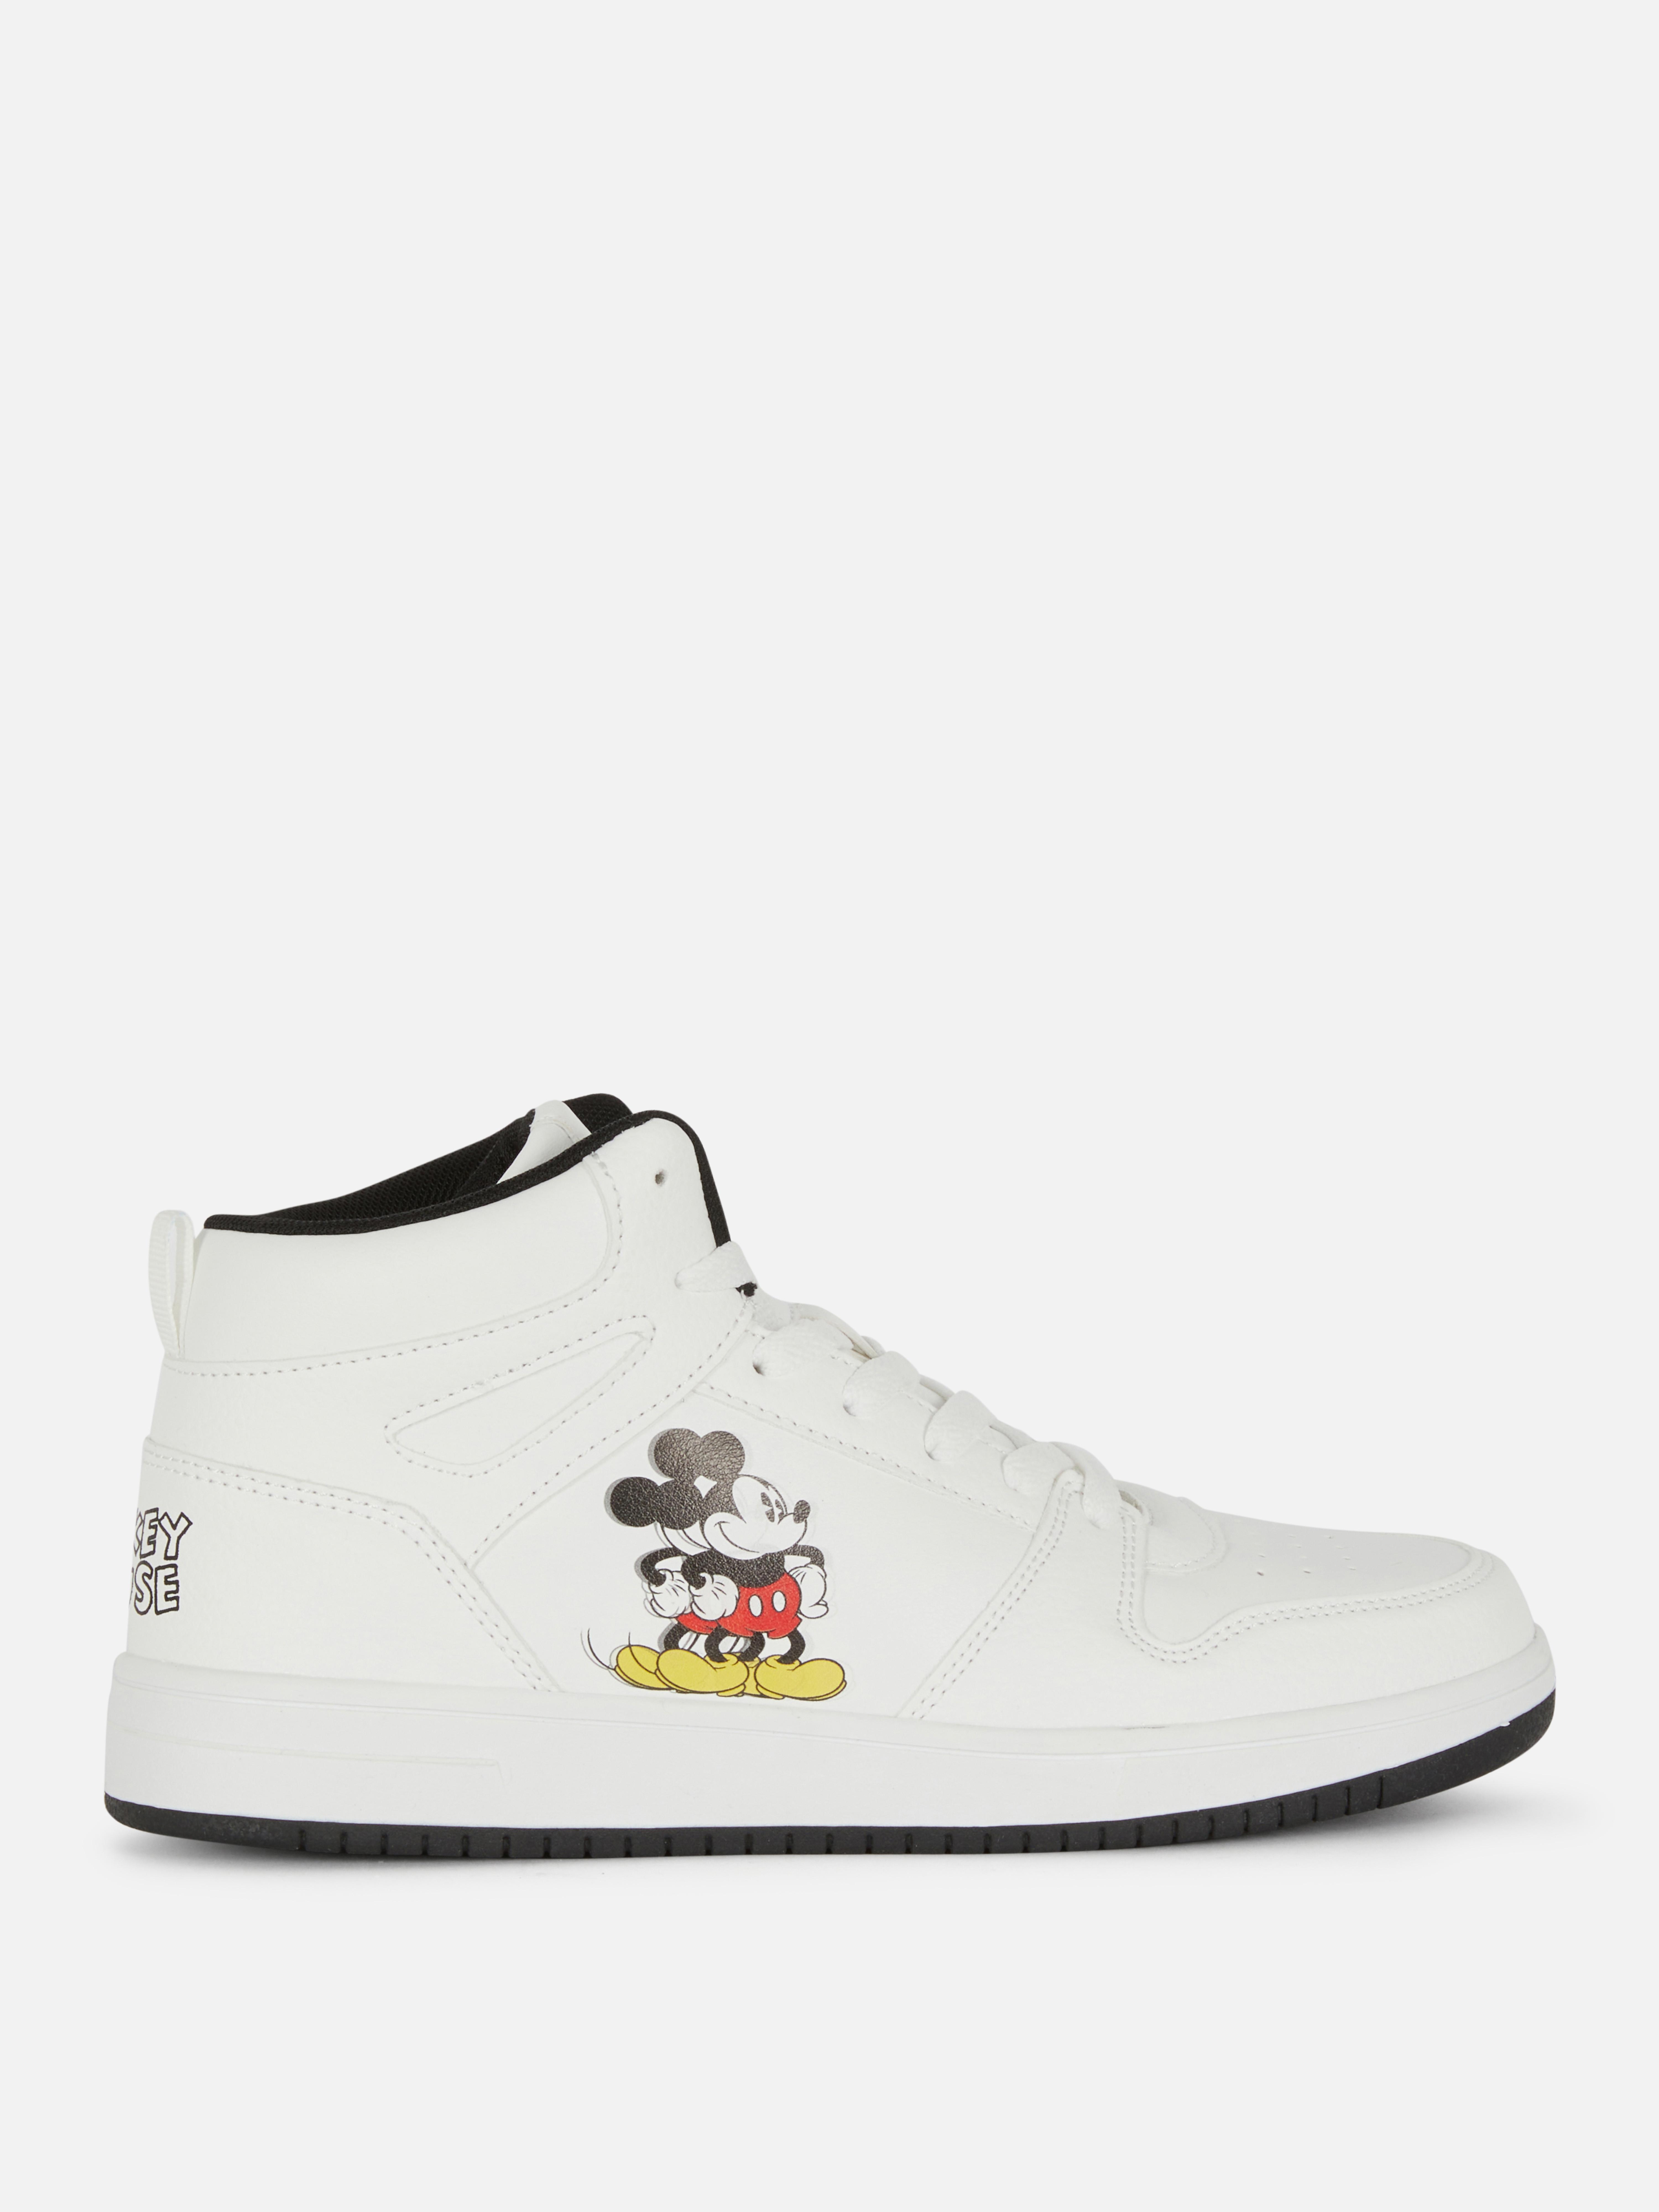 Disney's Minnie Mouse High-Top Trainers